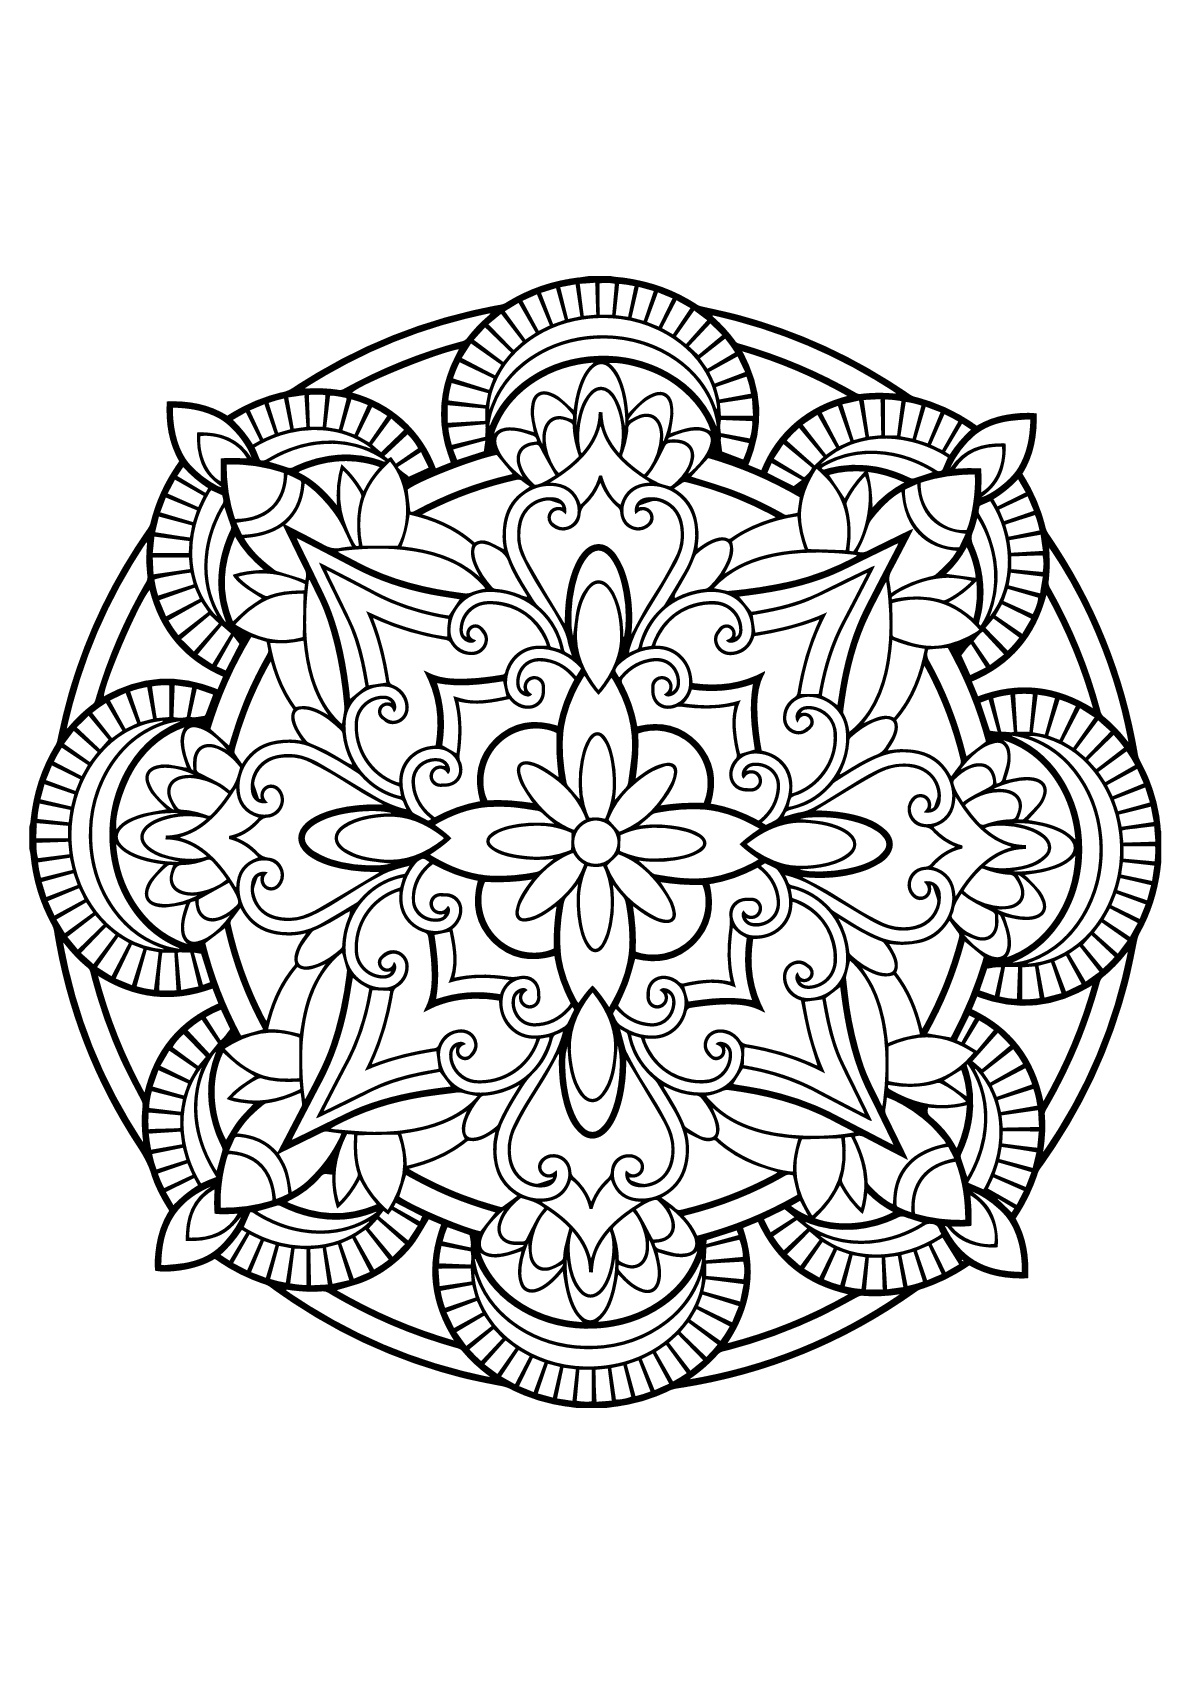 Download Mandala from free coloring books for adults 23 - Mandalas Adult Coloring Pages